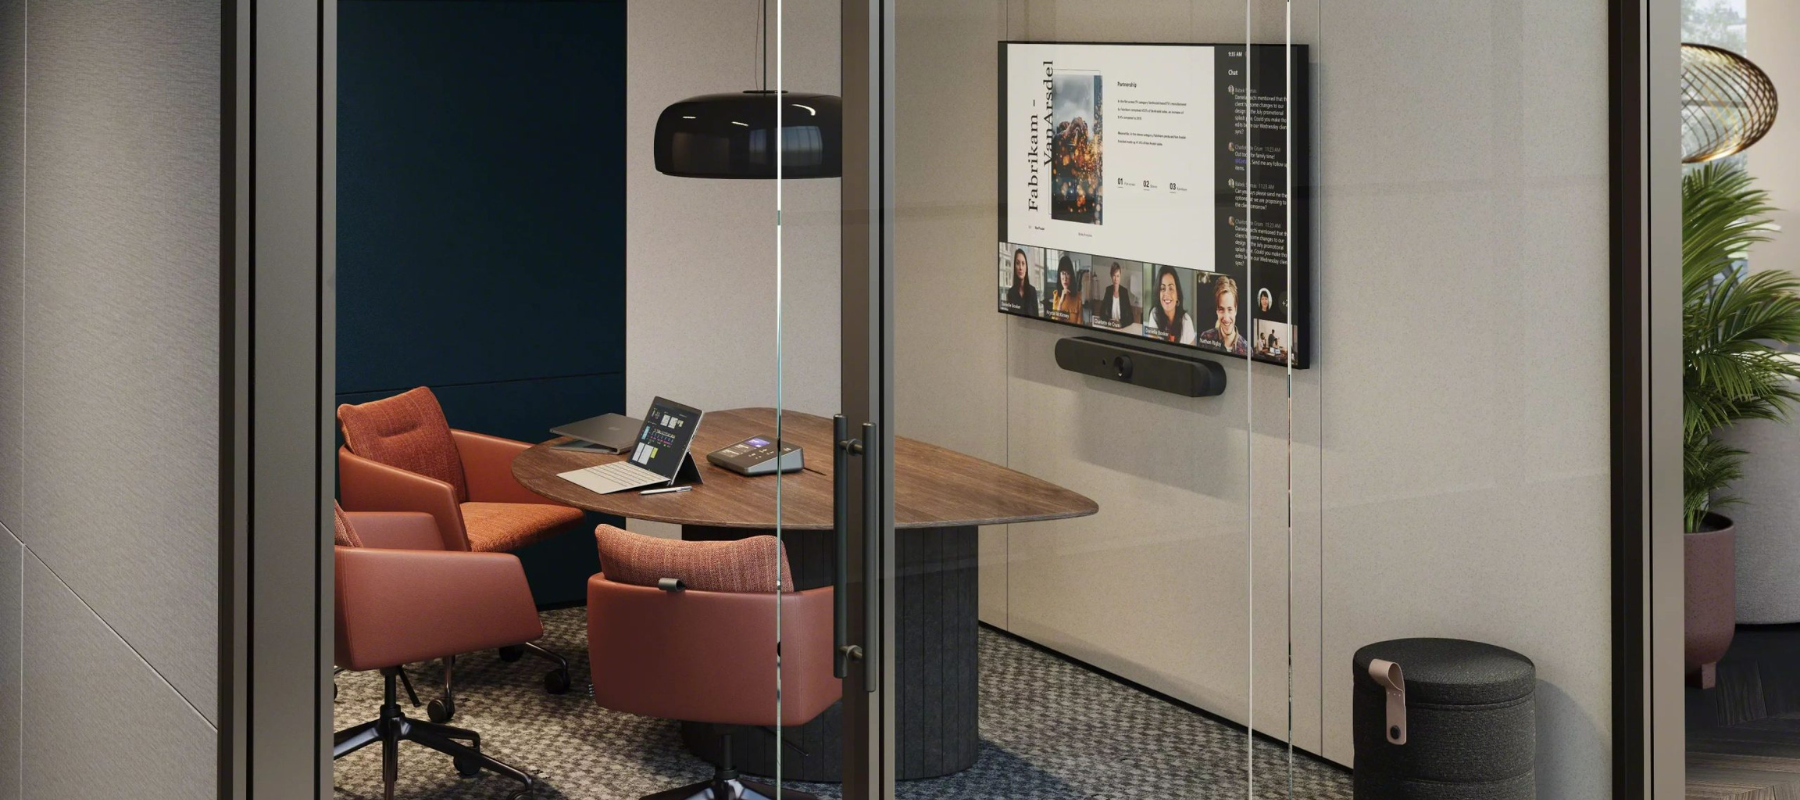 A hybrid meeting room with video technology integrated in modular wall